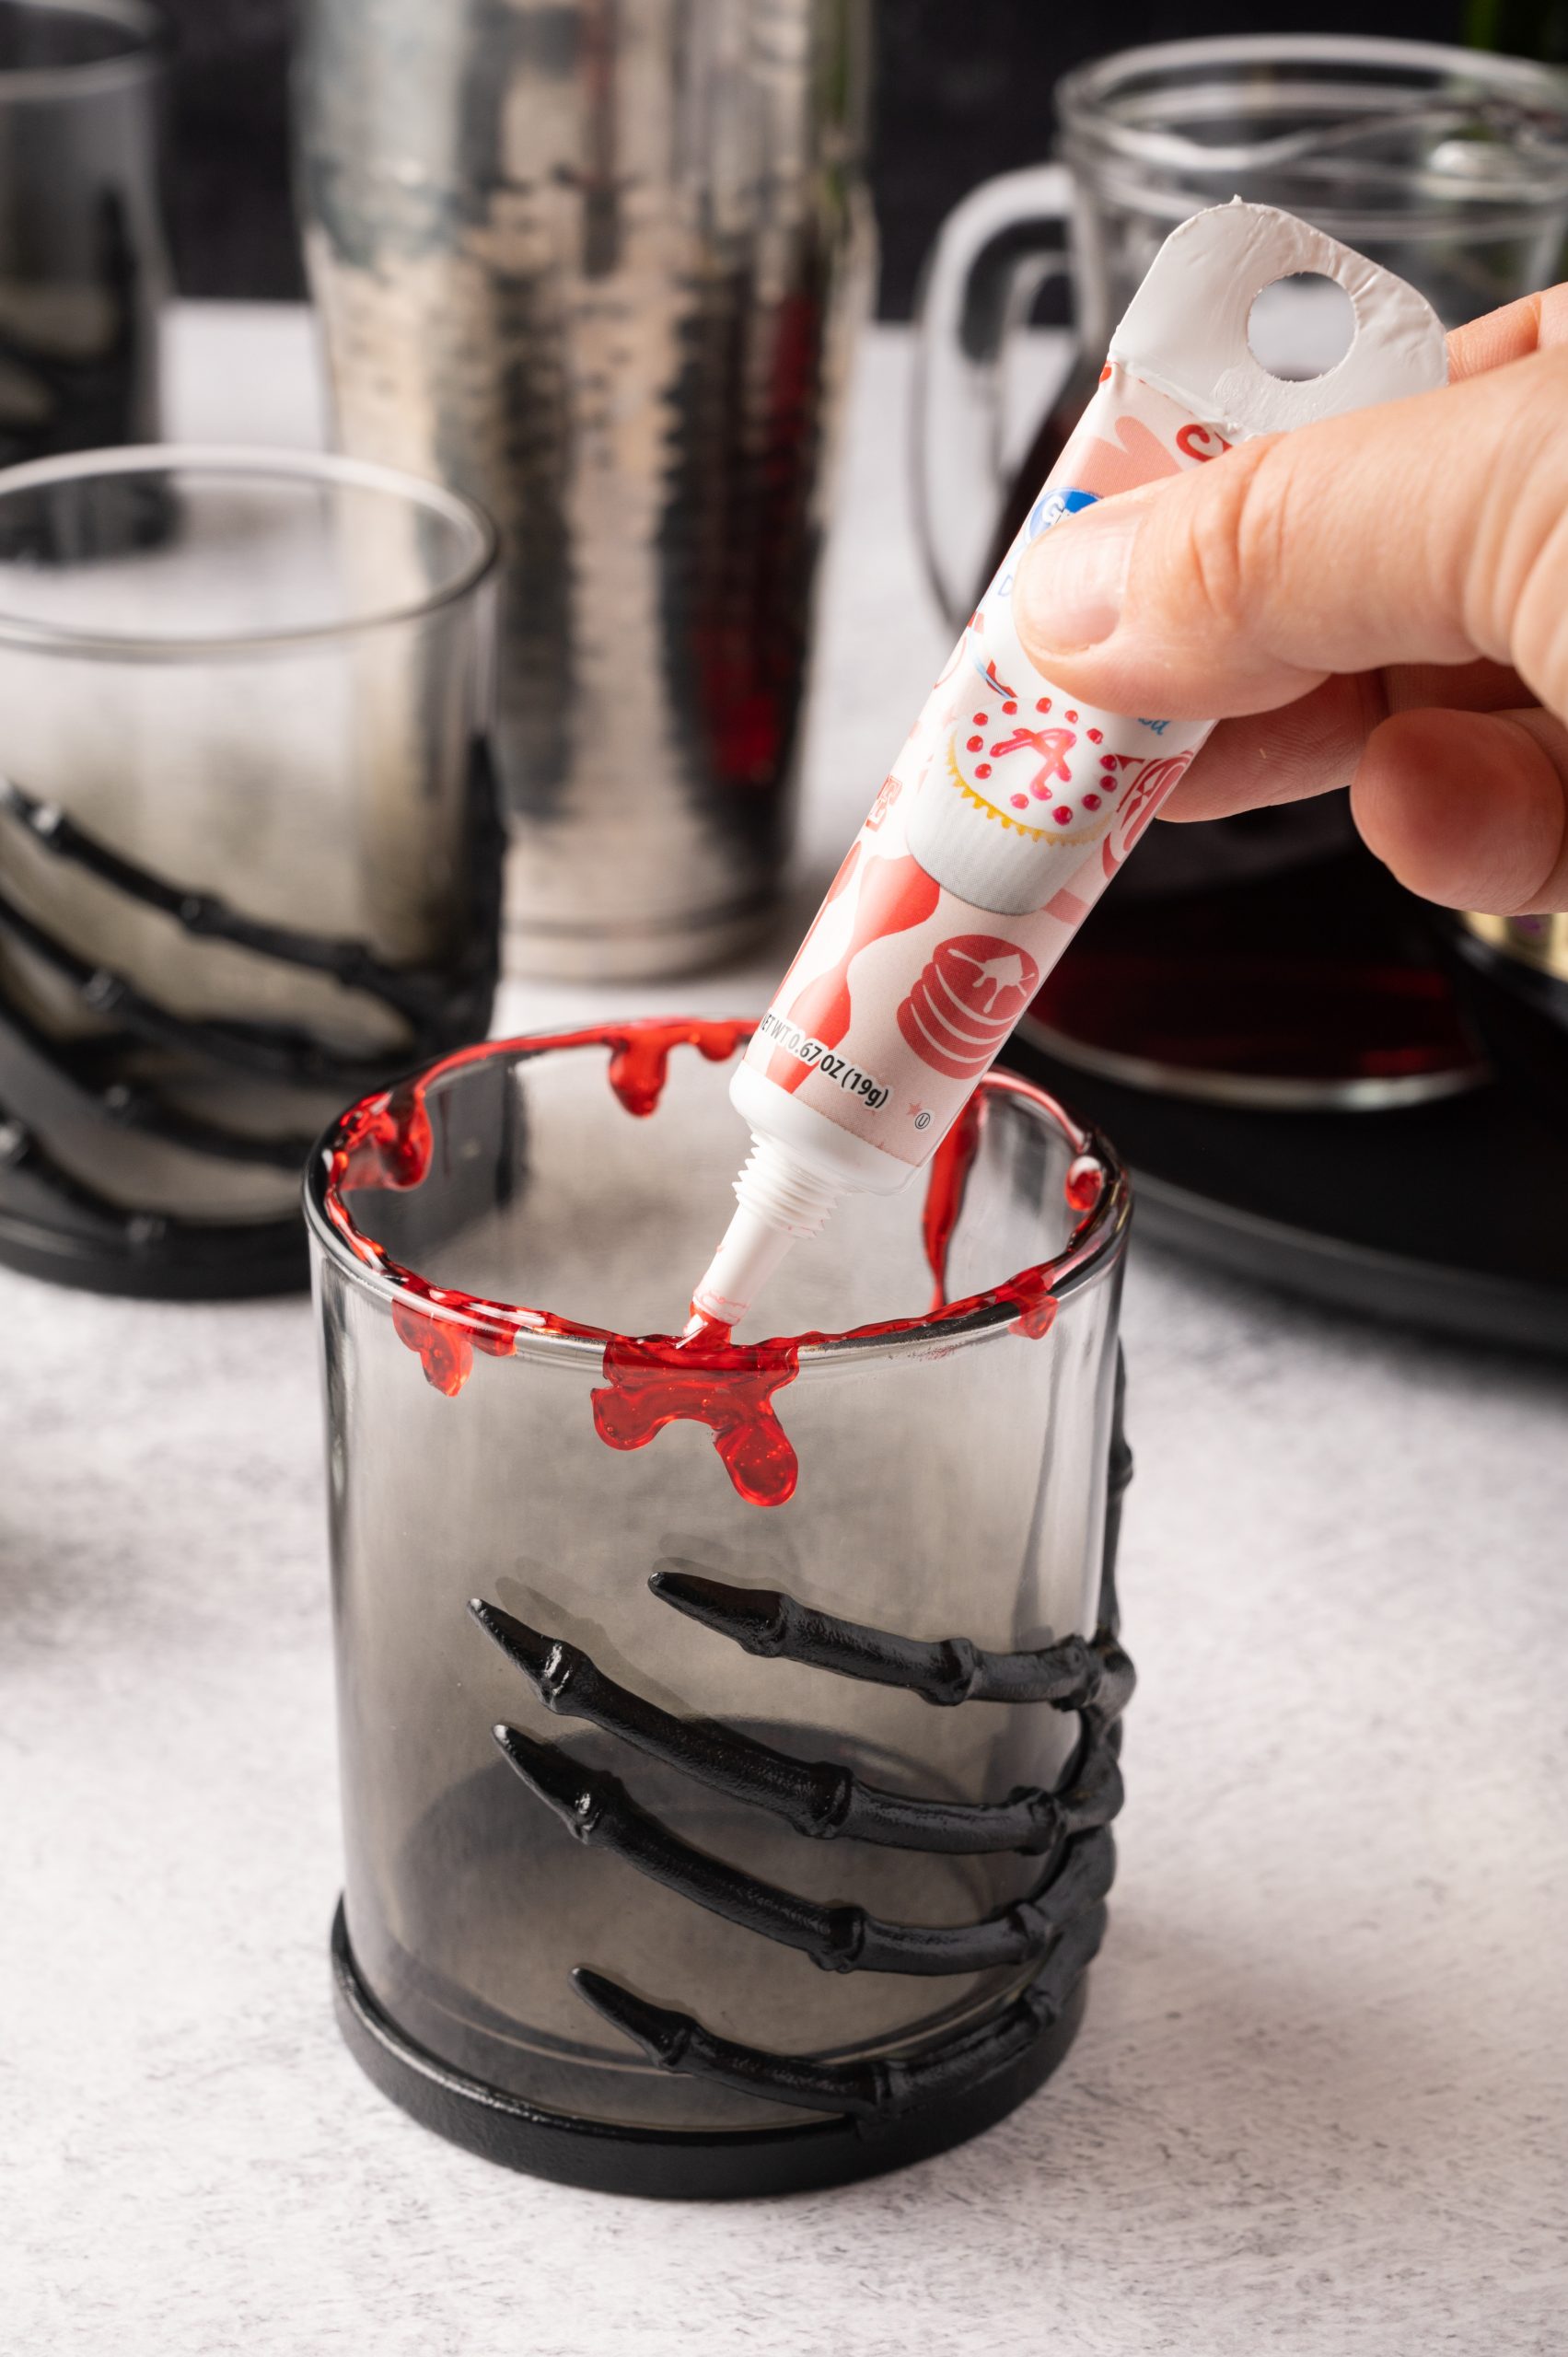 Use red icing to rim the glass, making it look like blood dripping down the sides